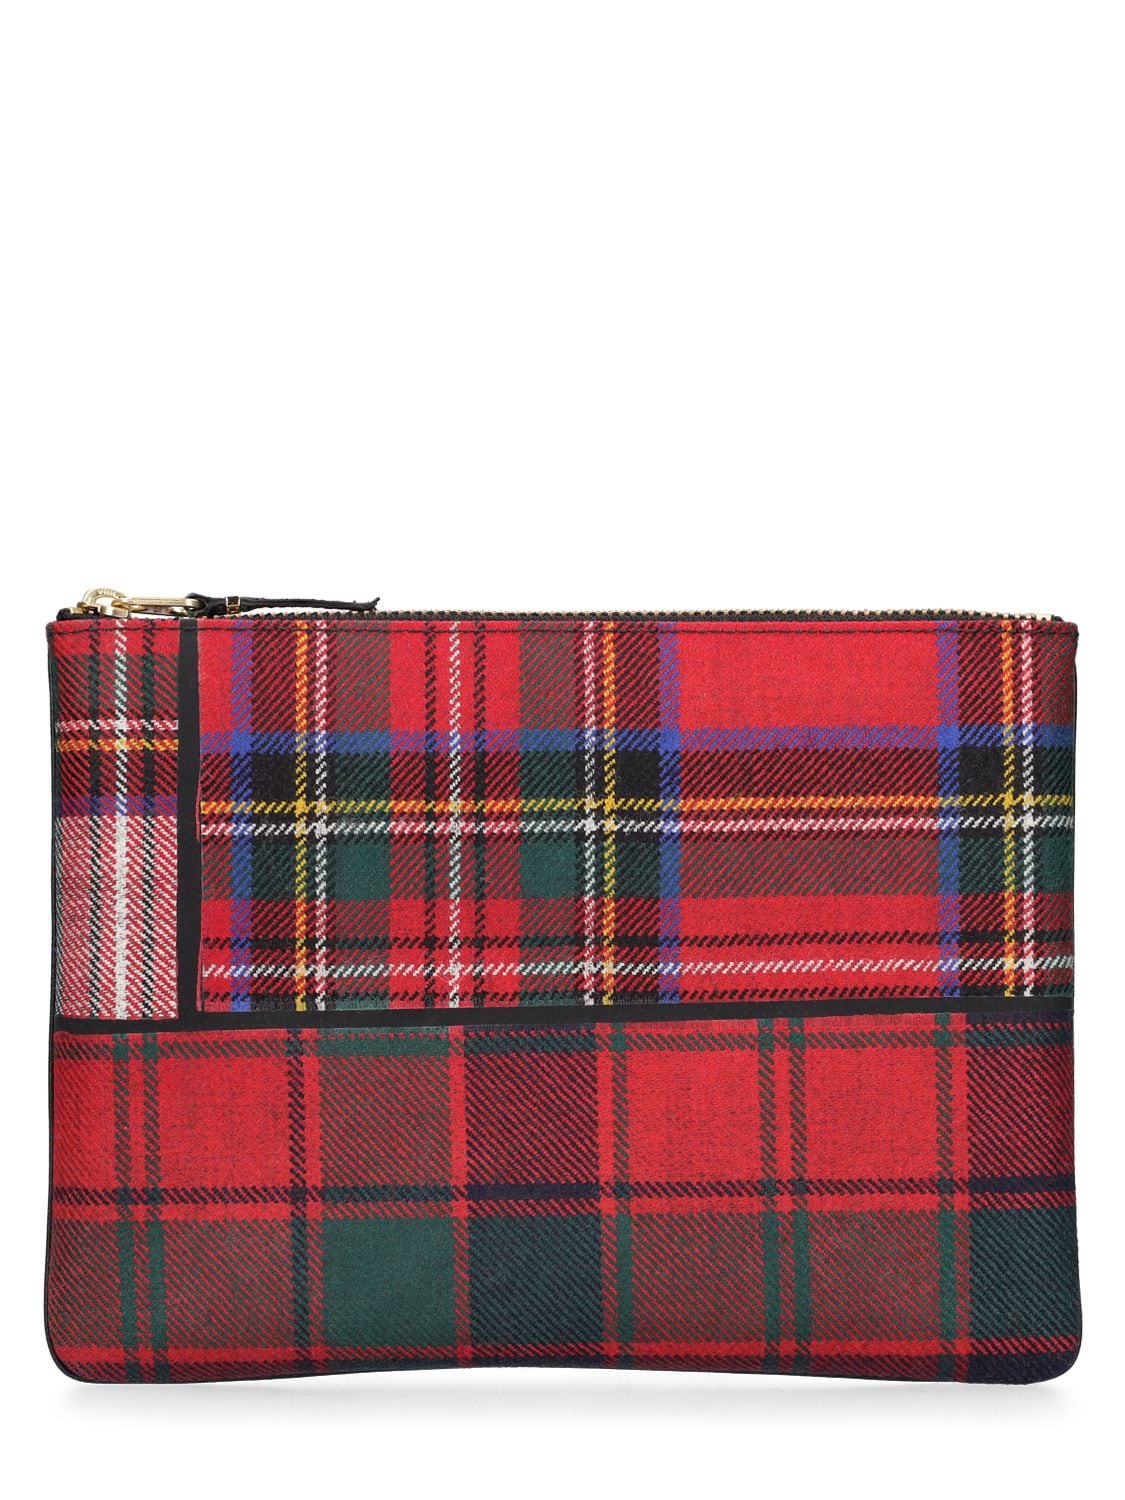 Image of Tartan Patchwork Zipped Pouch